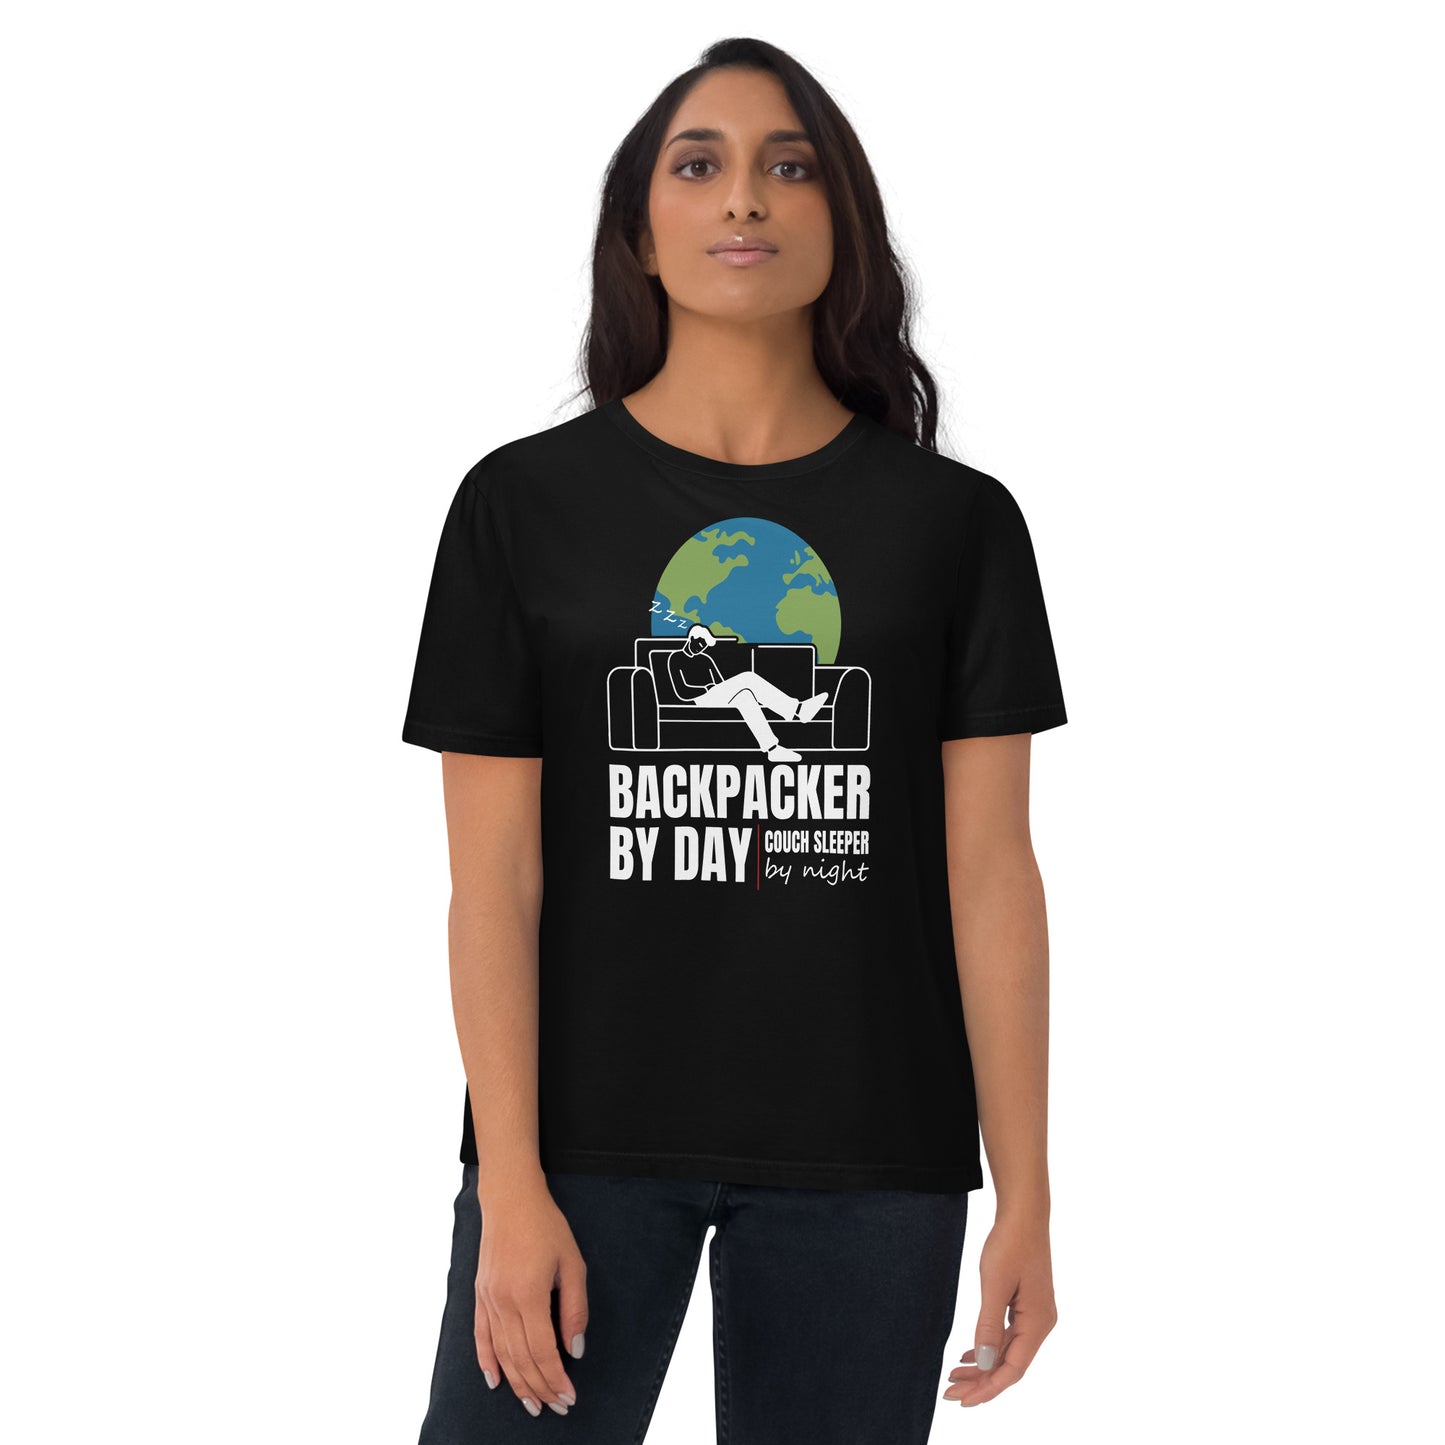 Backpacker by Day Couch Sleeper by Night Bio-Baumwoll-T-Shirt